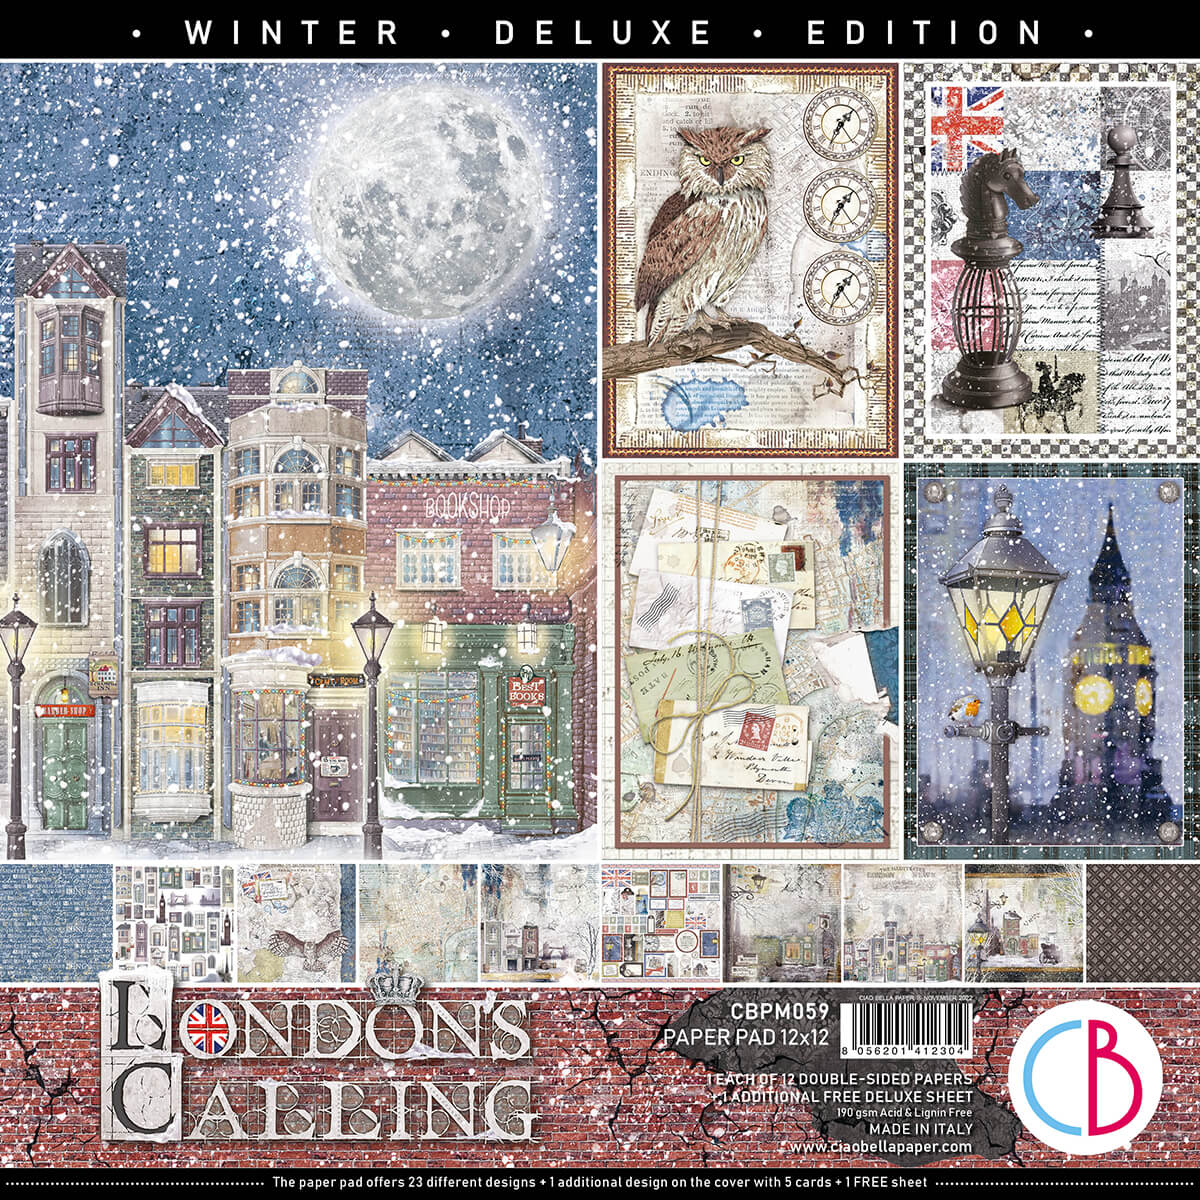 London's Calling Pad 12x12 12/Pkg + 1 Free deluxe sheet